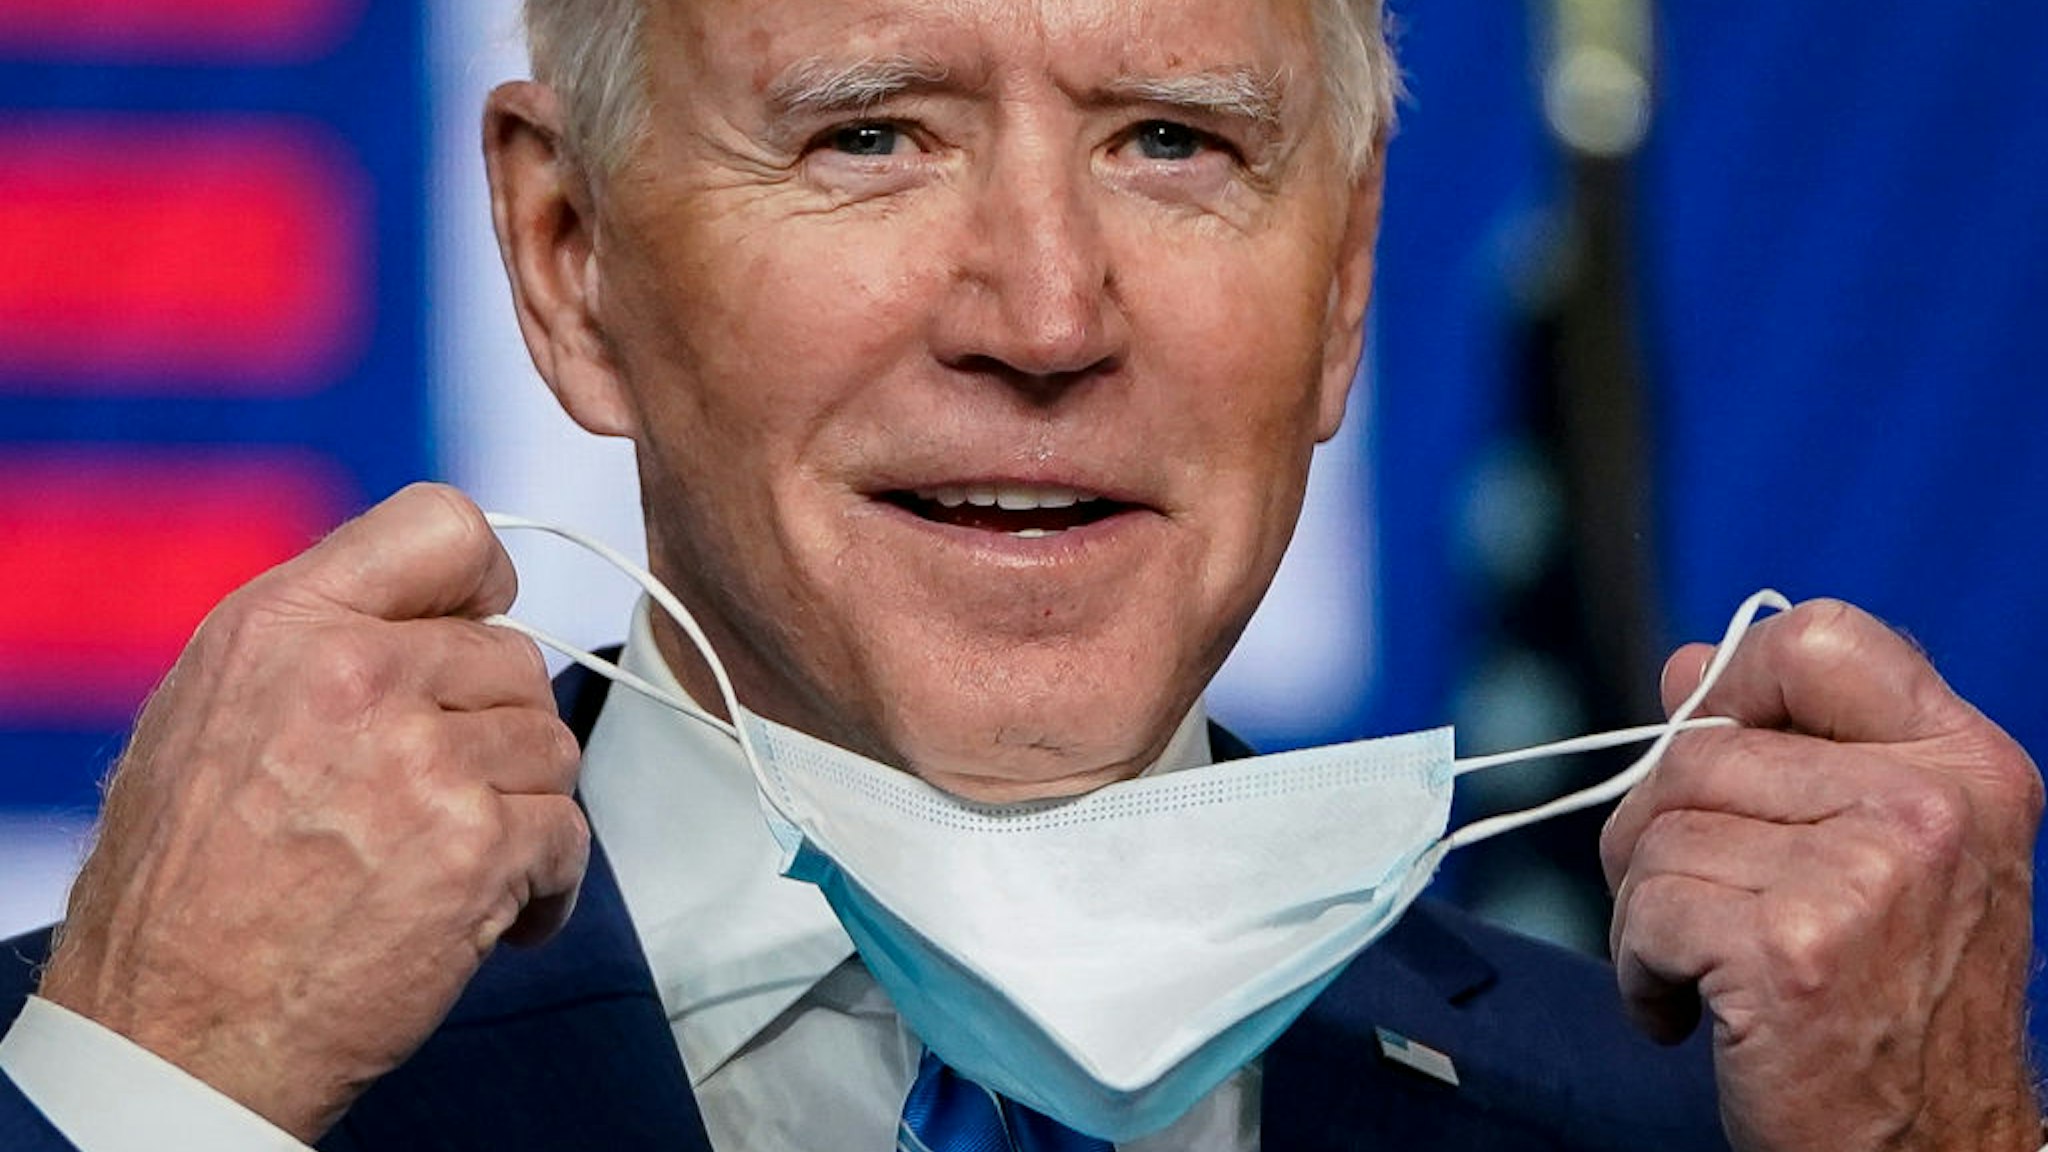 WILMINGTON, DE - NOVEMBER 04: Democratic presidential nominee Joe Biden takes his face mask off as he arrives to speak one day after America voted in the presidential election, on November 04, 2020 in Wilmington, Delaware. Biden spoke as votes are still being counted in his tight race against incumbent U.S. President Donald Trump which remains too close to call.